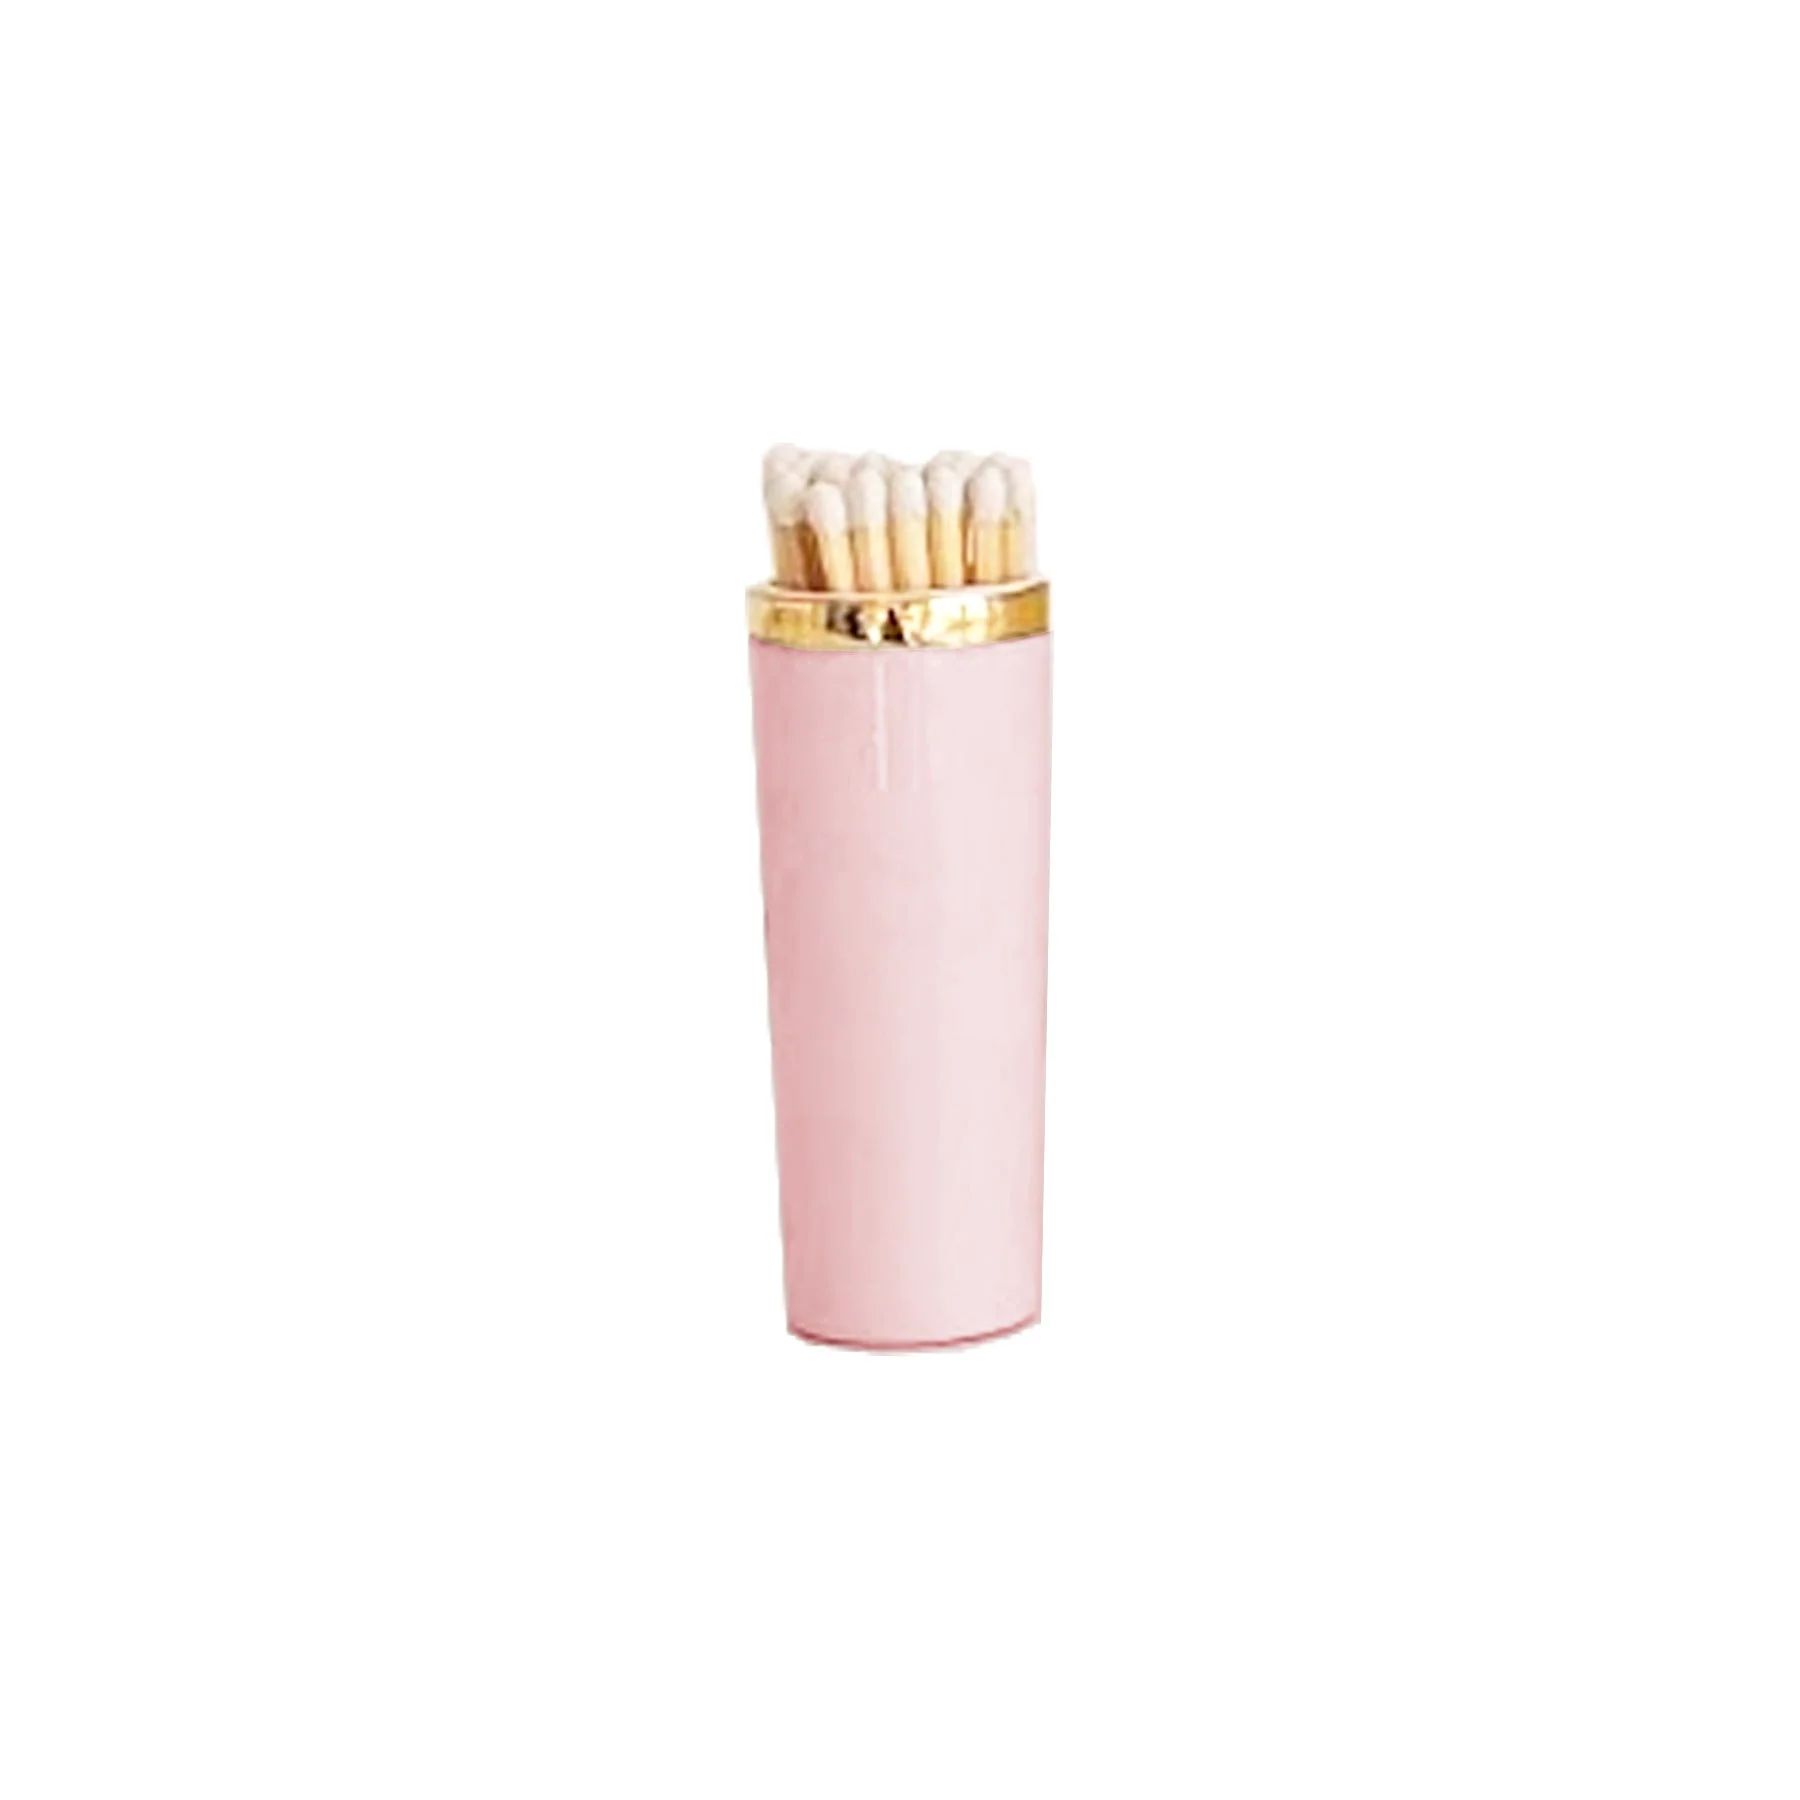 Solid Match Holder/ Striker with Gold Accent | Ruby Clay Company